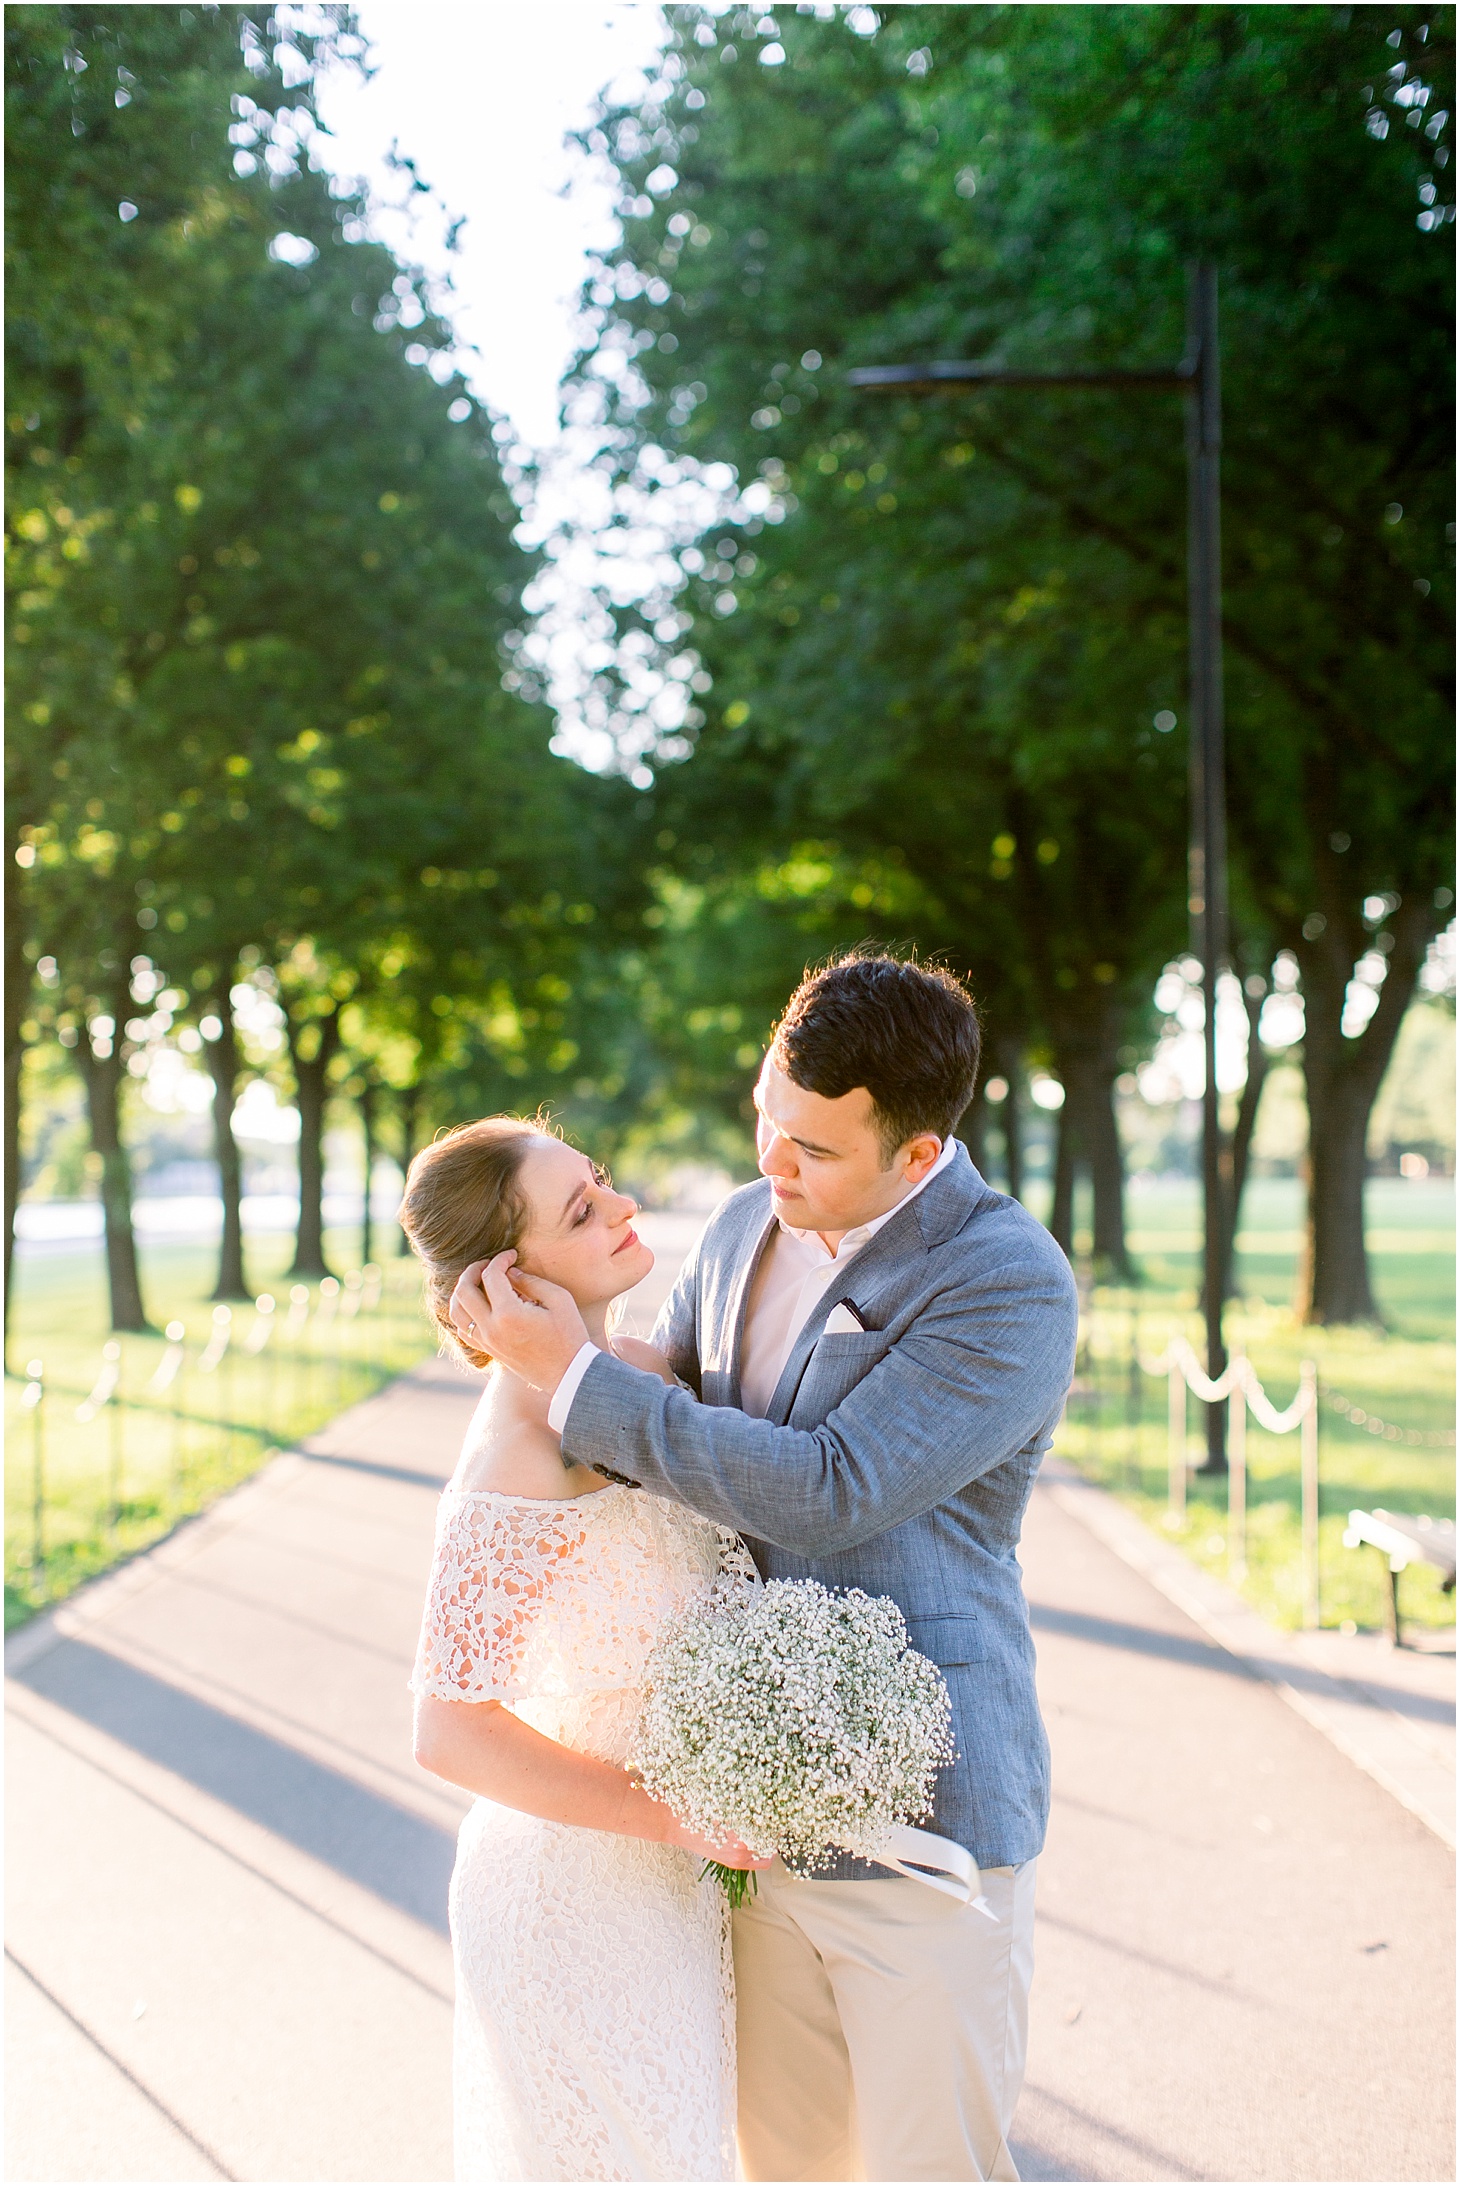 Portraits on the National Mall, Intimate Sunrise Wedding Portraits at the Lincoln Memorial, Sarah Bradshaw Photography, DC Wedding Photographer